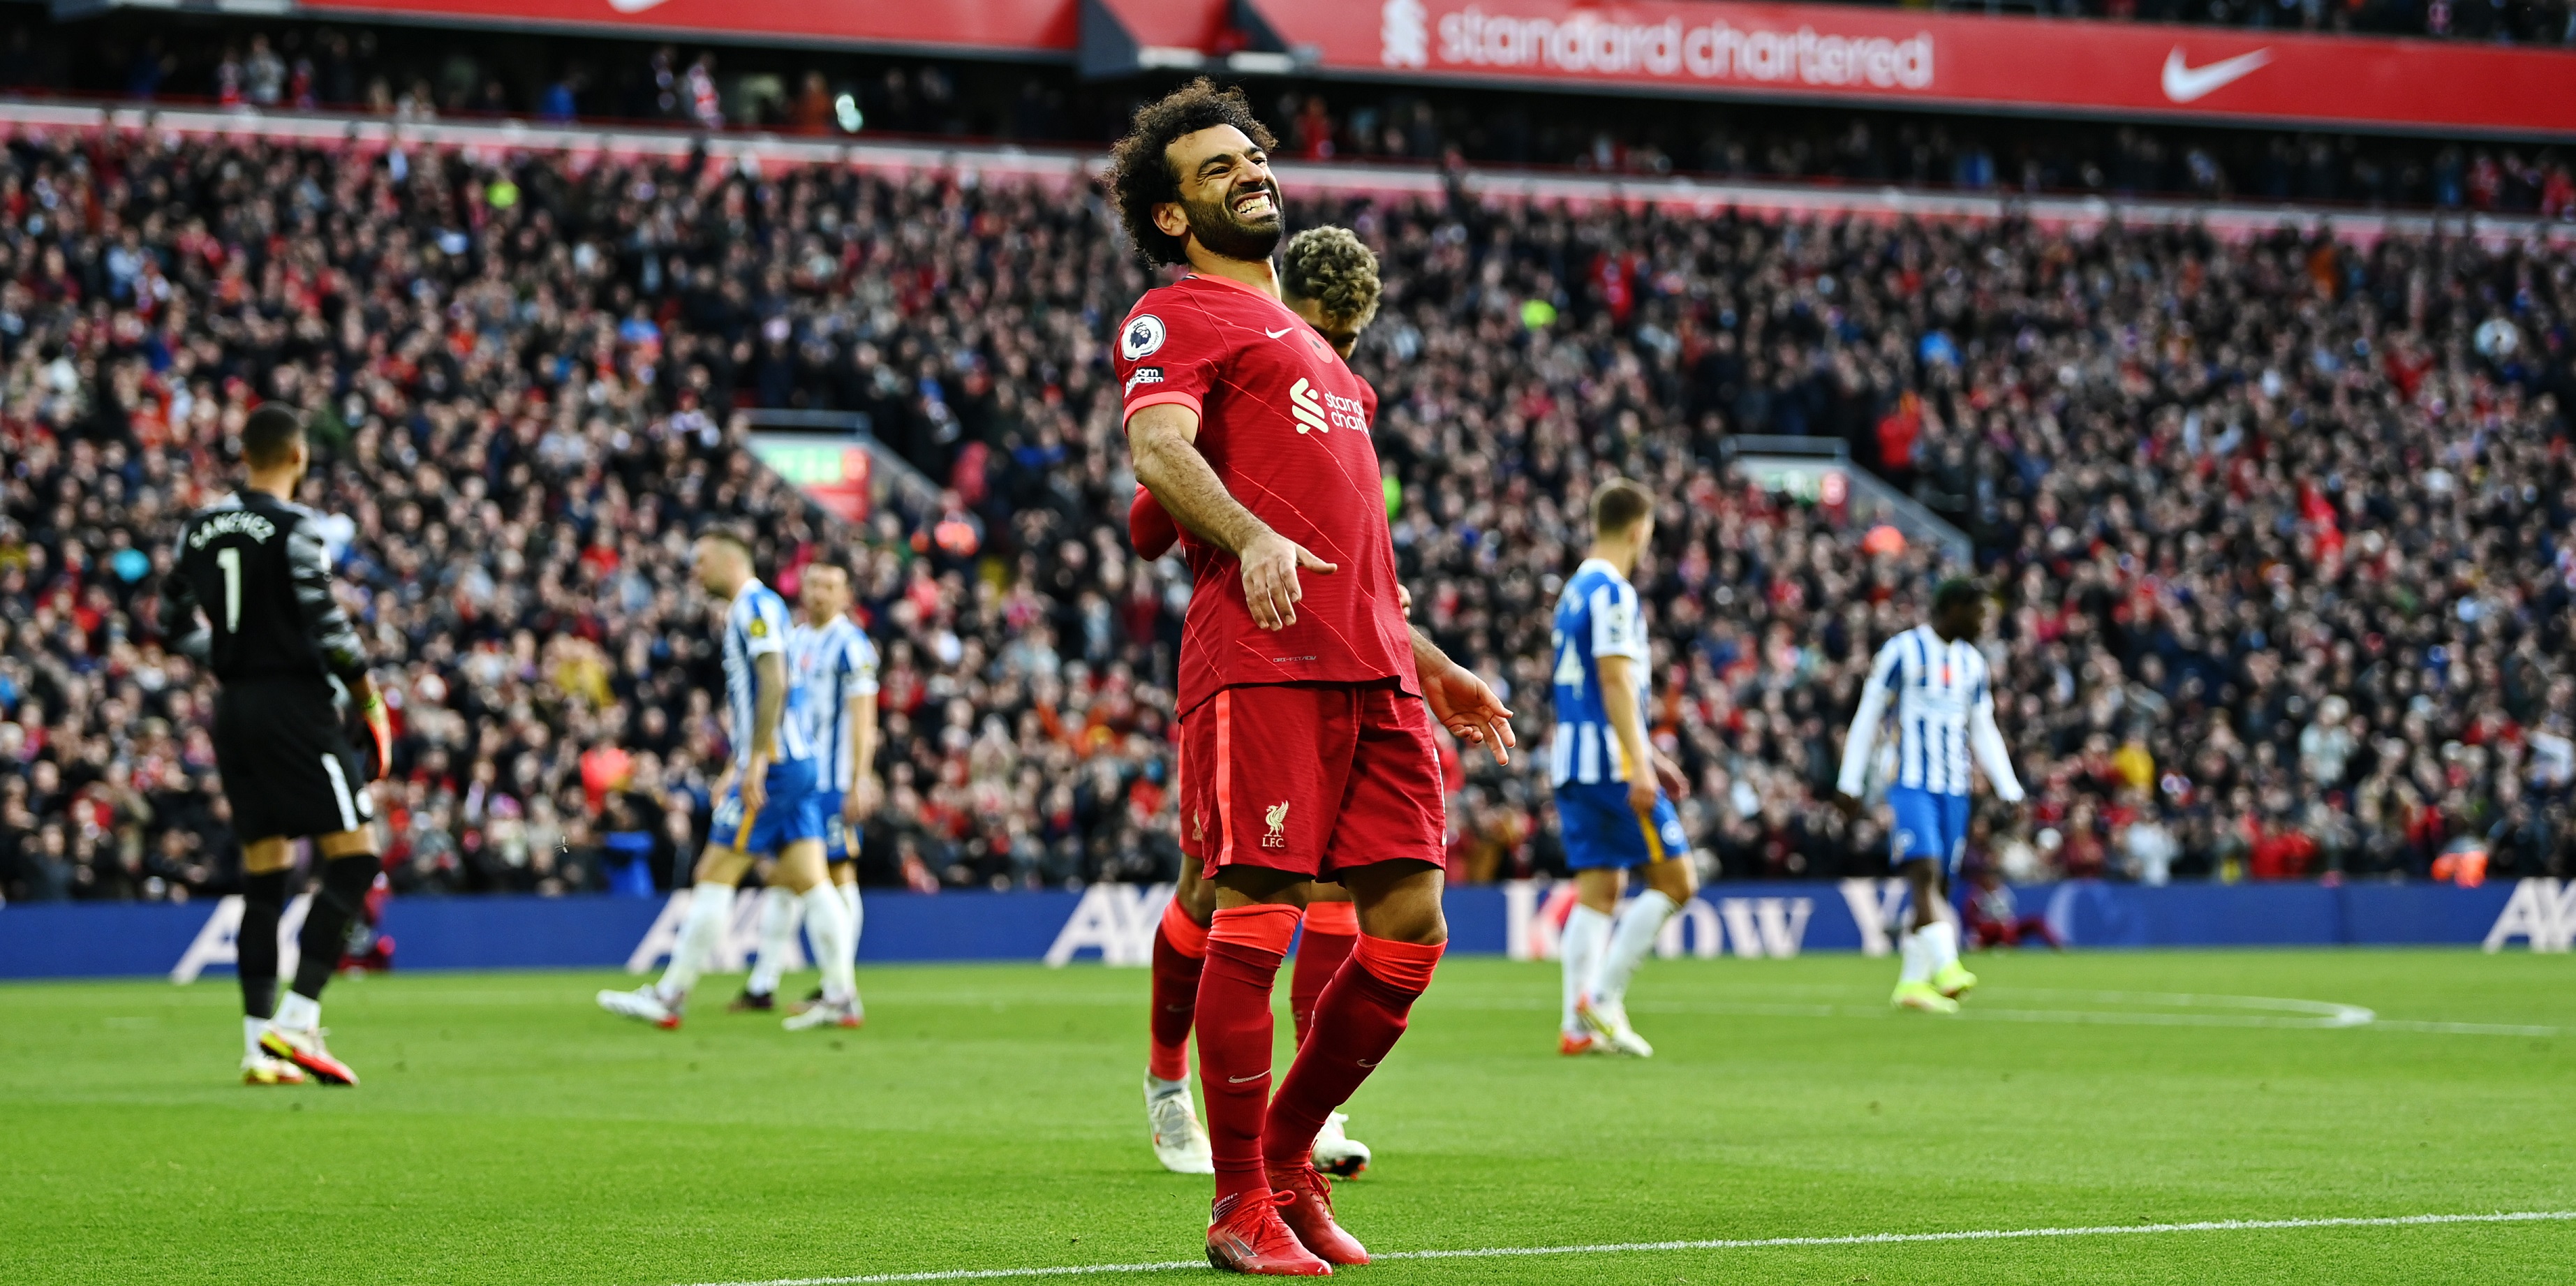 ‘Up to Liverpool’ – Fabrizio Romano shares update on possibility of La Liga exit for Mo Salah